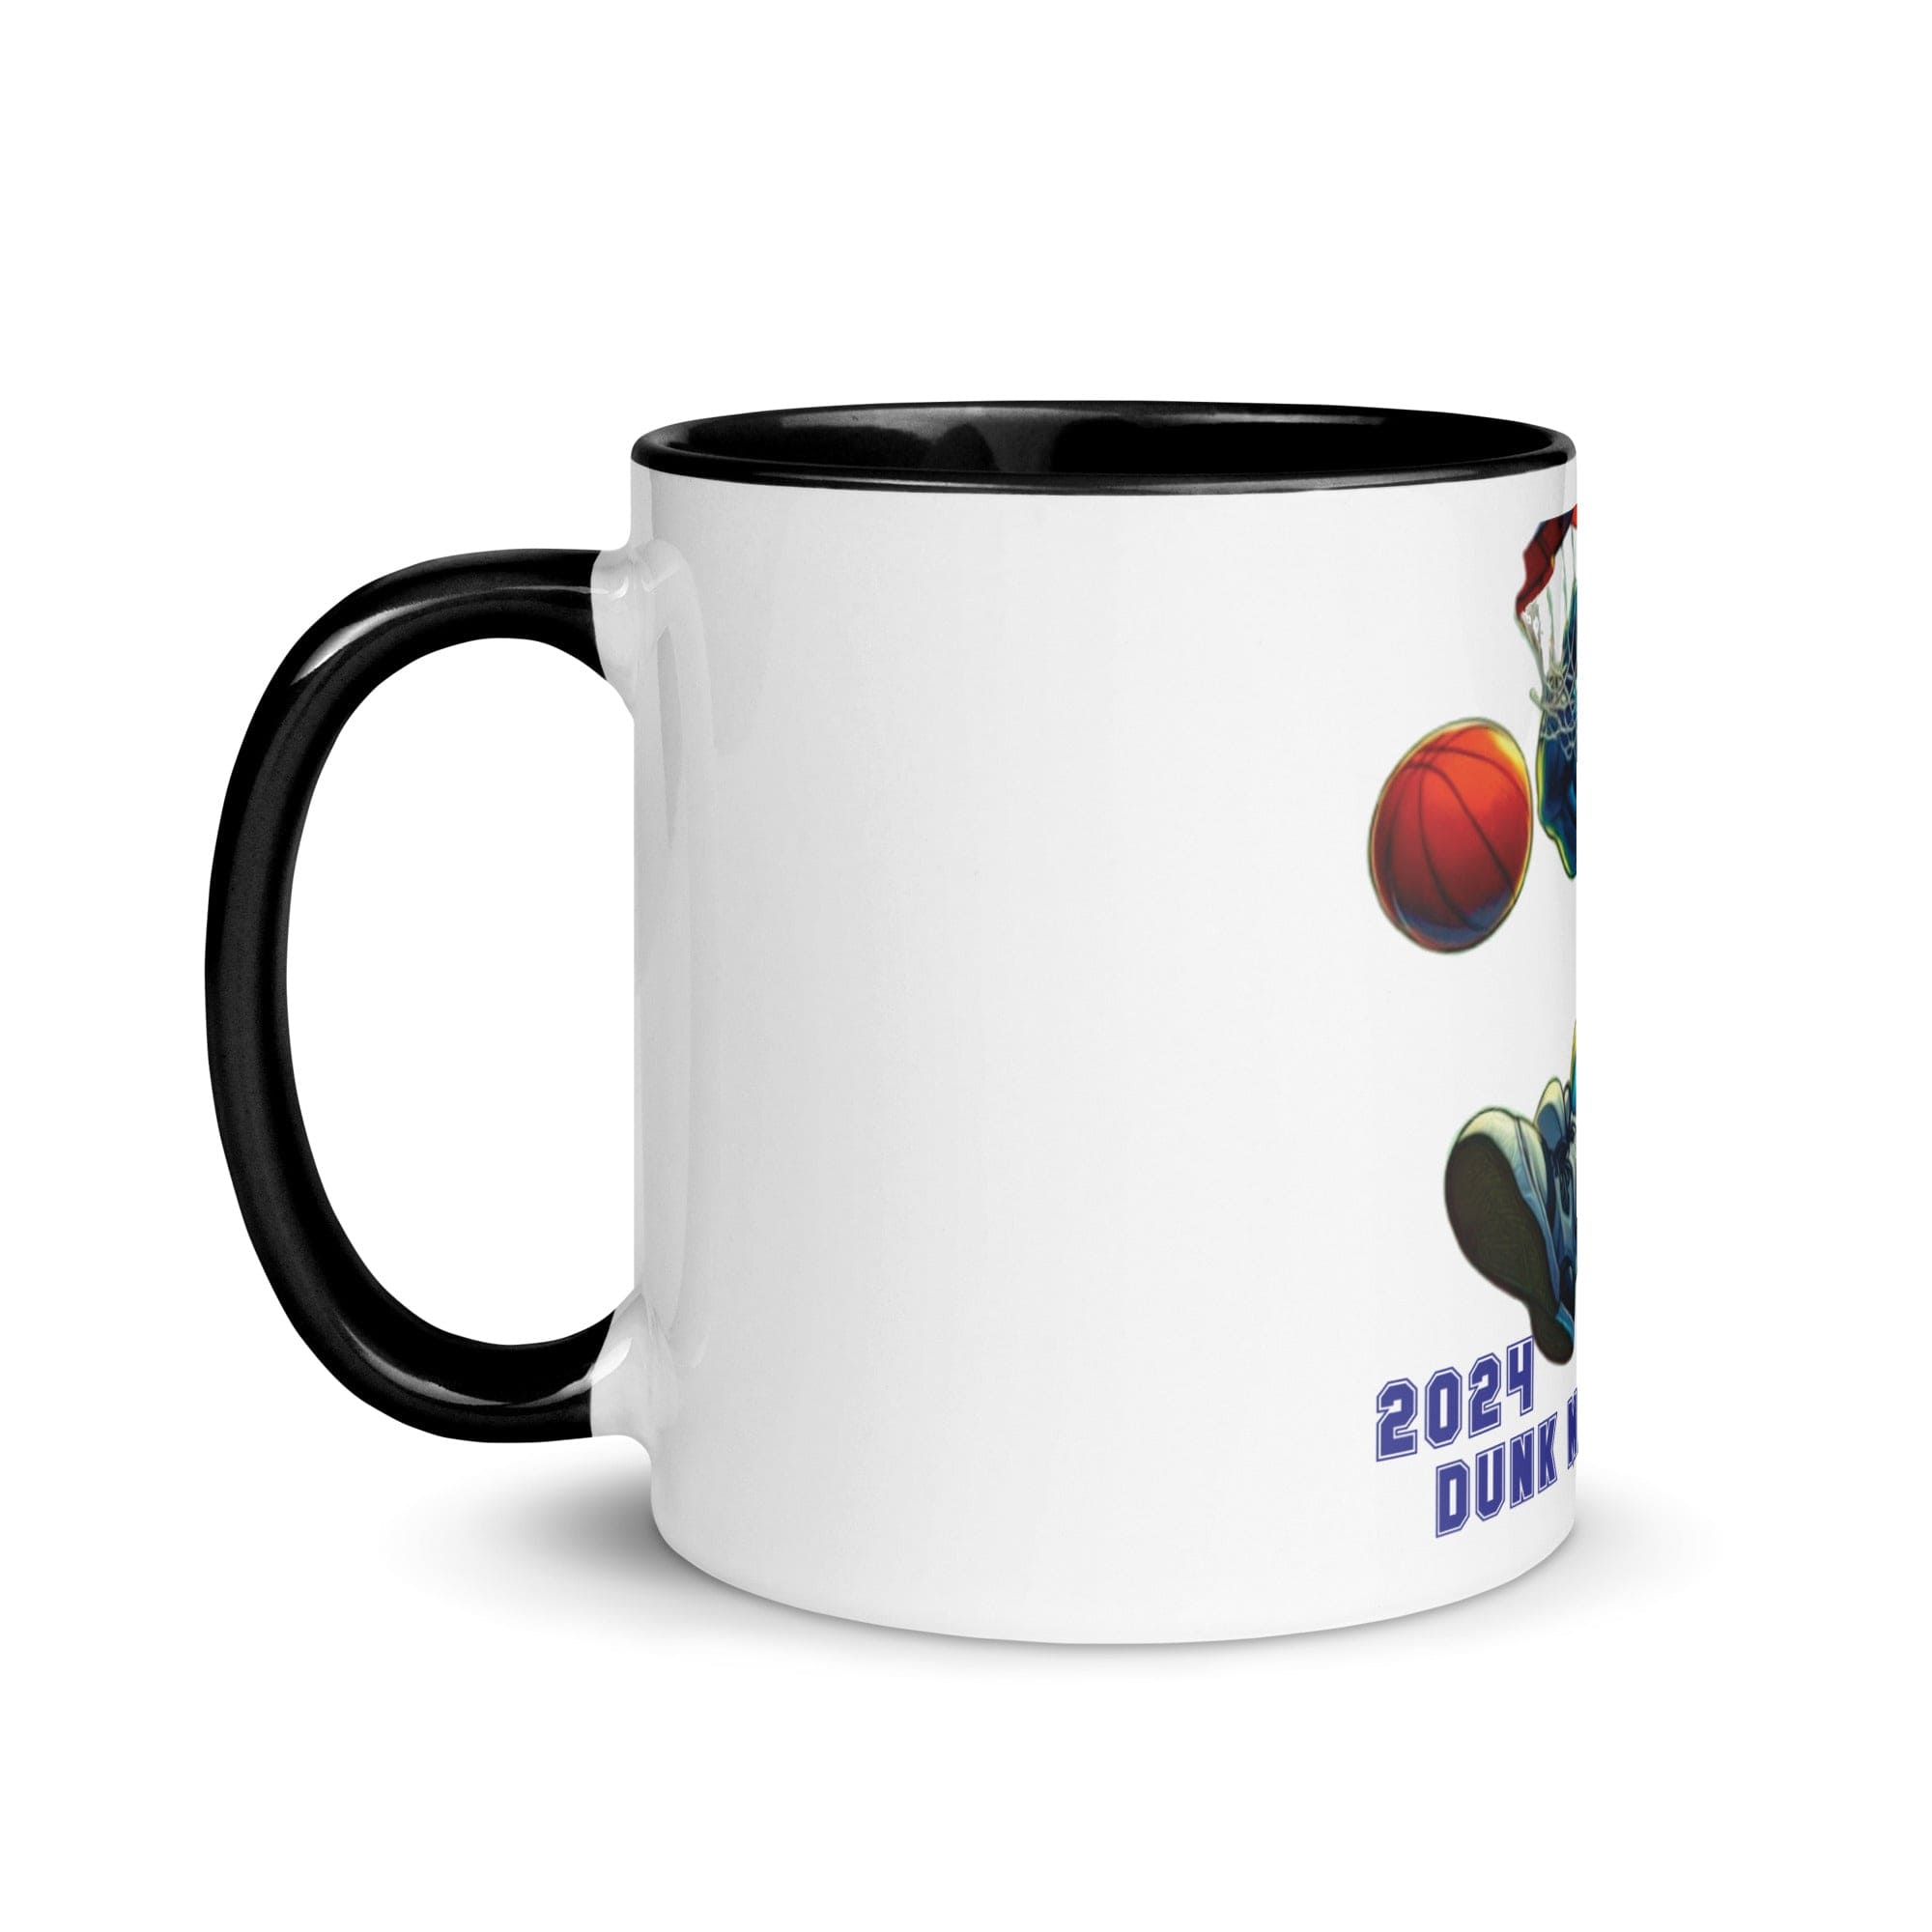 Start Your Day Right with Colorful Interior Mugs